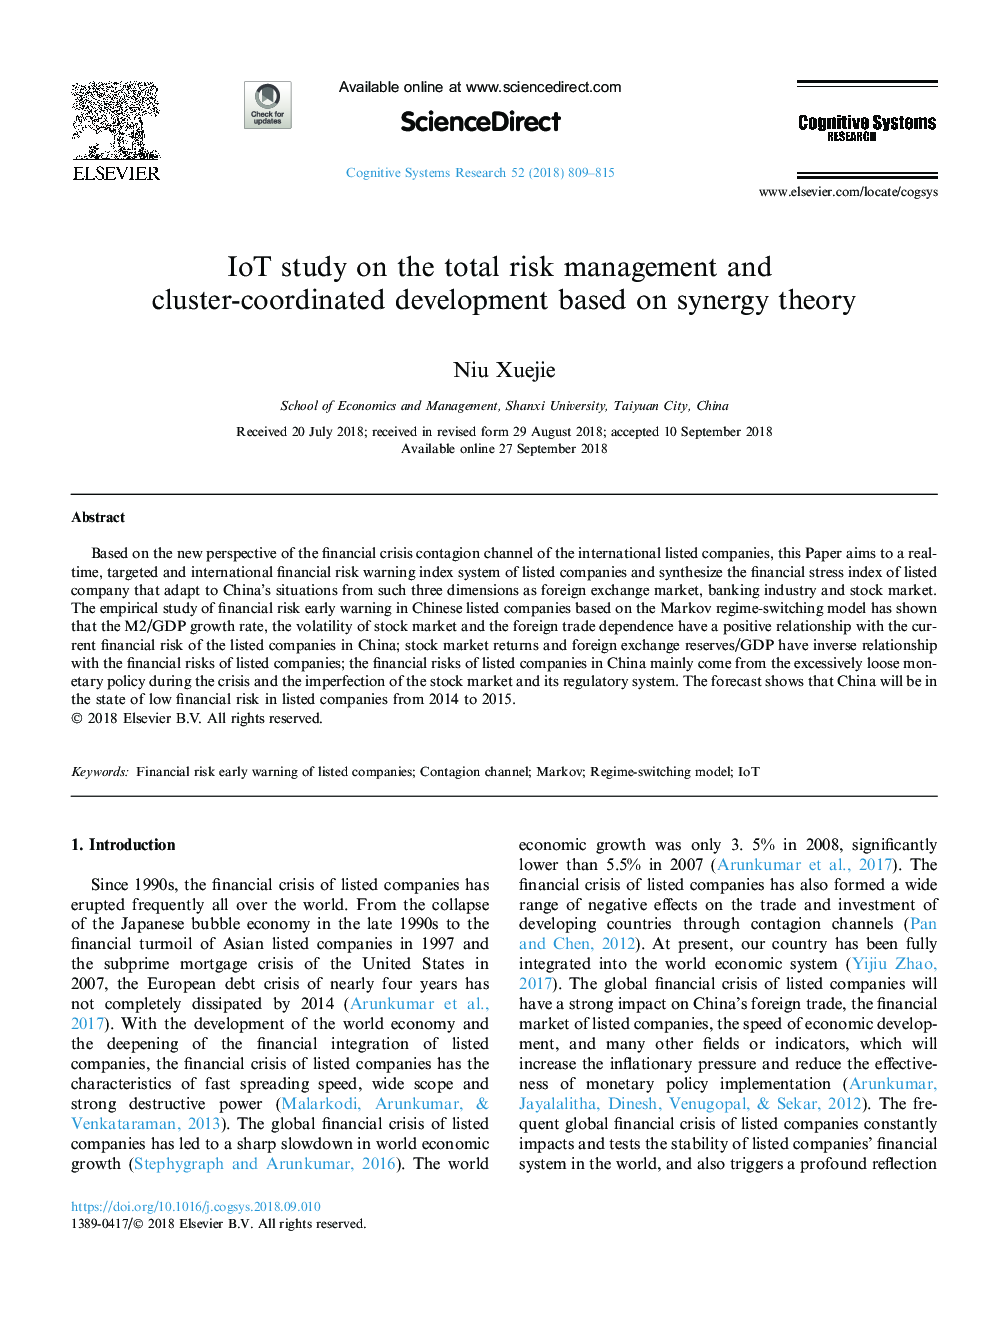 IoT study on the total risk management and cluster-coordinated development based on synergy theory